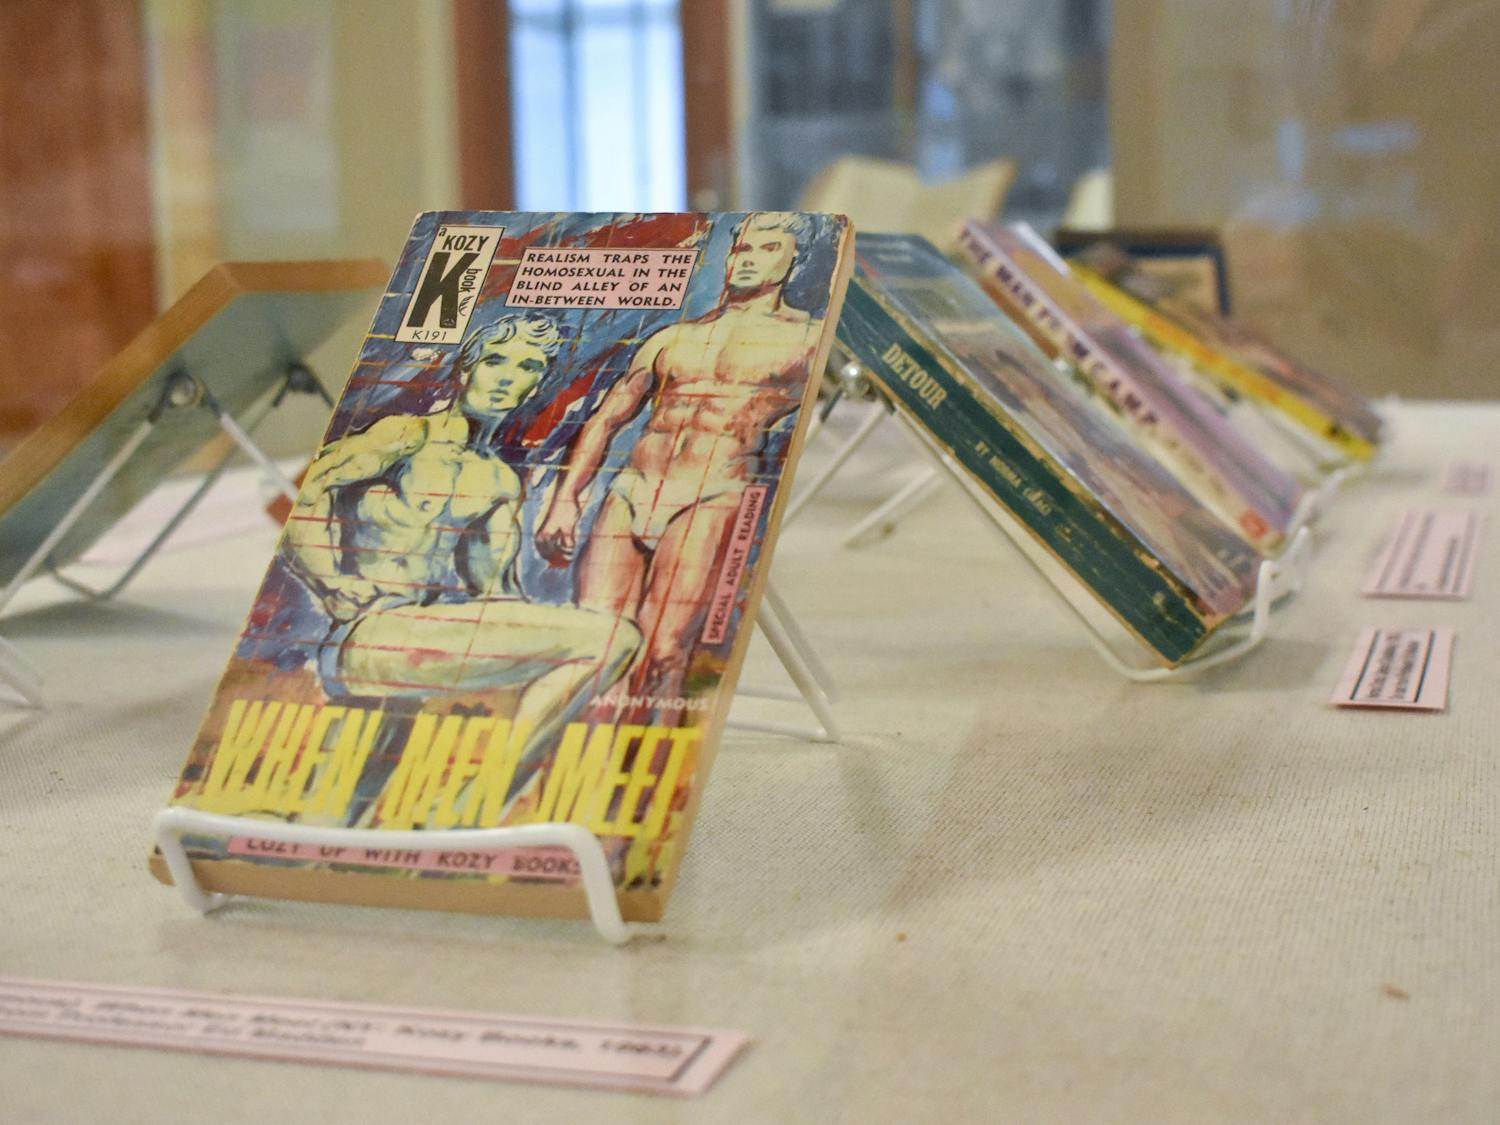 The book "When Men Meet" is displayed alongside other books highlighting queer identities in the “To tell the secret of my nights and days” exhibit. The collection of books, newspapers, photos and magazines in the Thomas Cooper Library is open until January 2024.